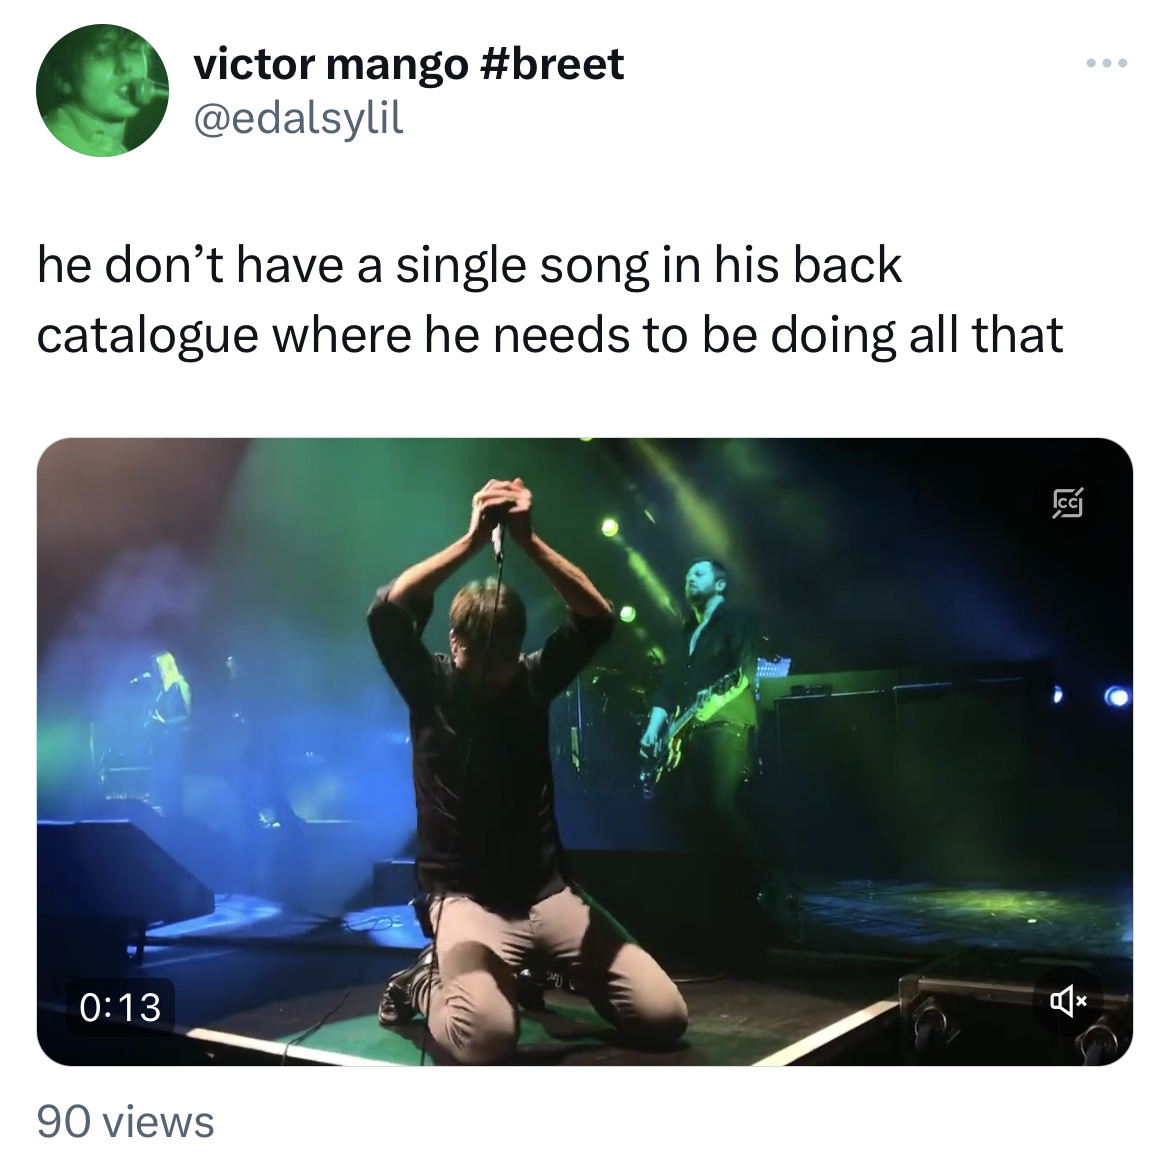 Don't have a single song where they need to do this - video - victor mango he don't have a single song in his back catalogue where he needs to be doing all that 90 views